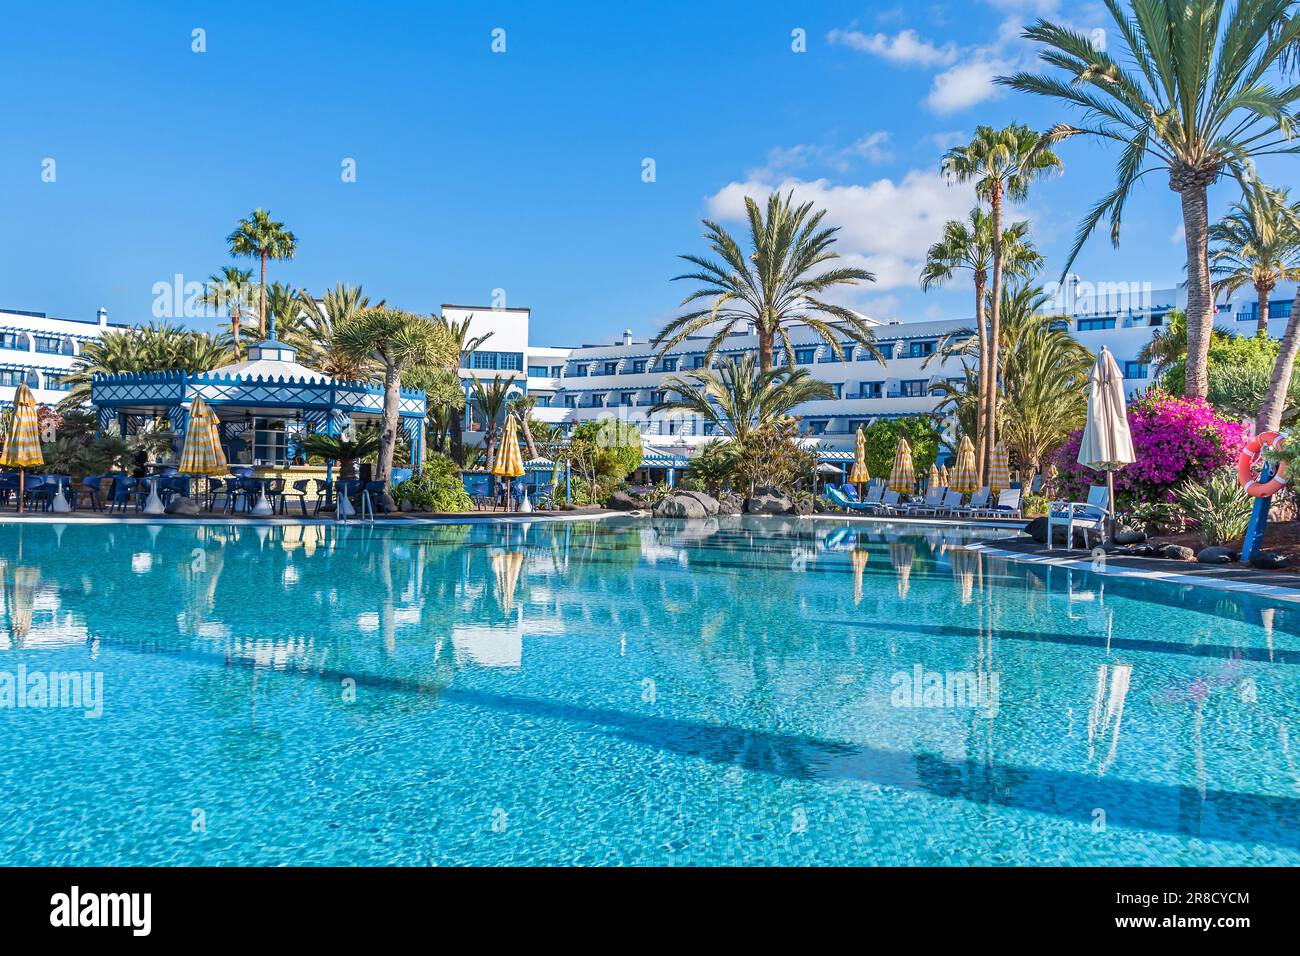 Puerto del Carmen, Spain - November 30, 2022: Pool landscape with tropical plants native to the Canary Island taken in the seaside resort of Playa de Stock Photo